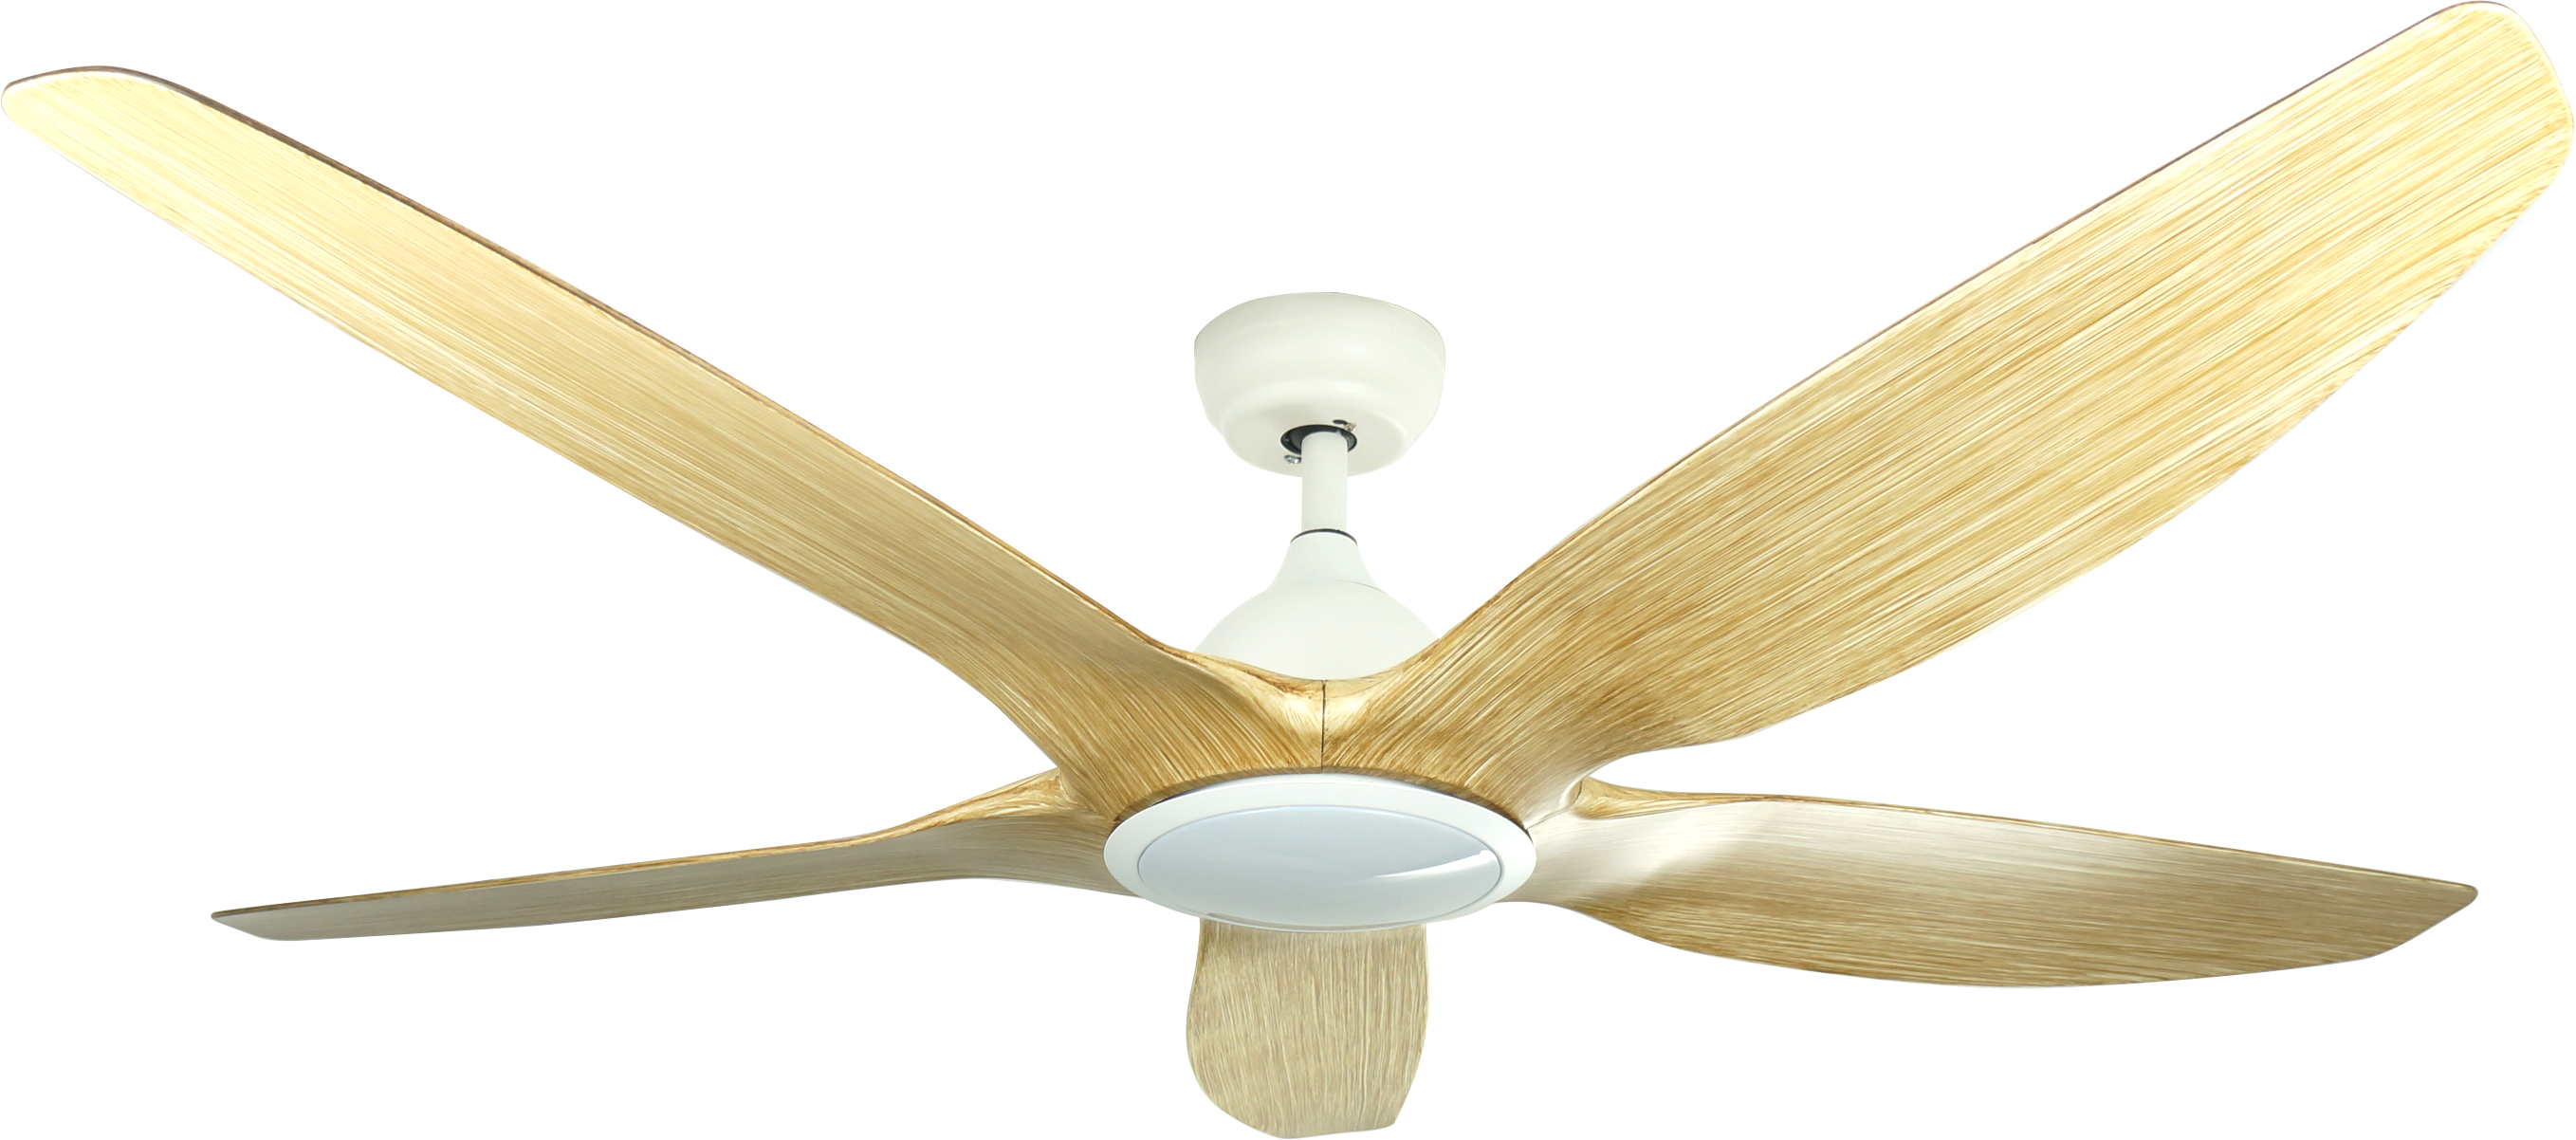 Airbena Ceiling Fan 48 "ABS Fan Blade with And without Light for Household Ceiling Fans